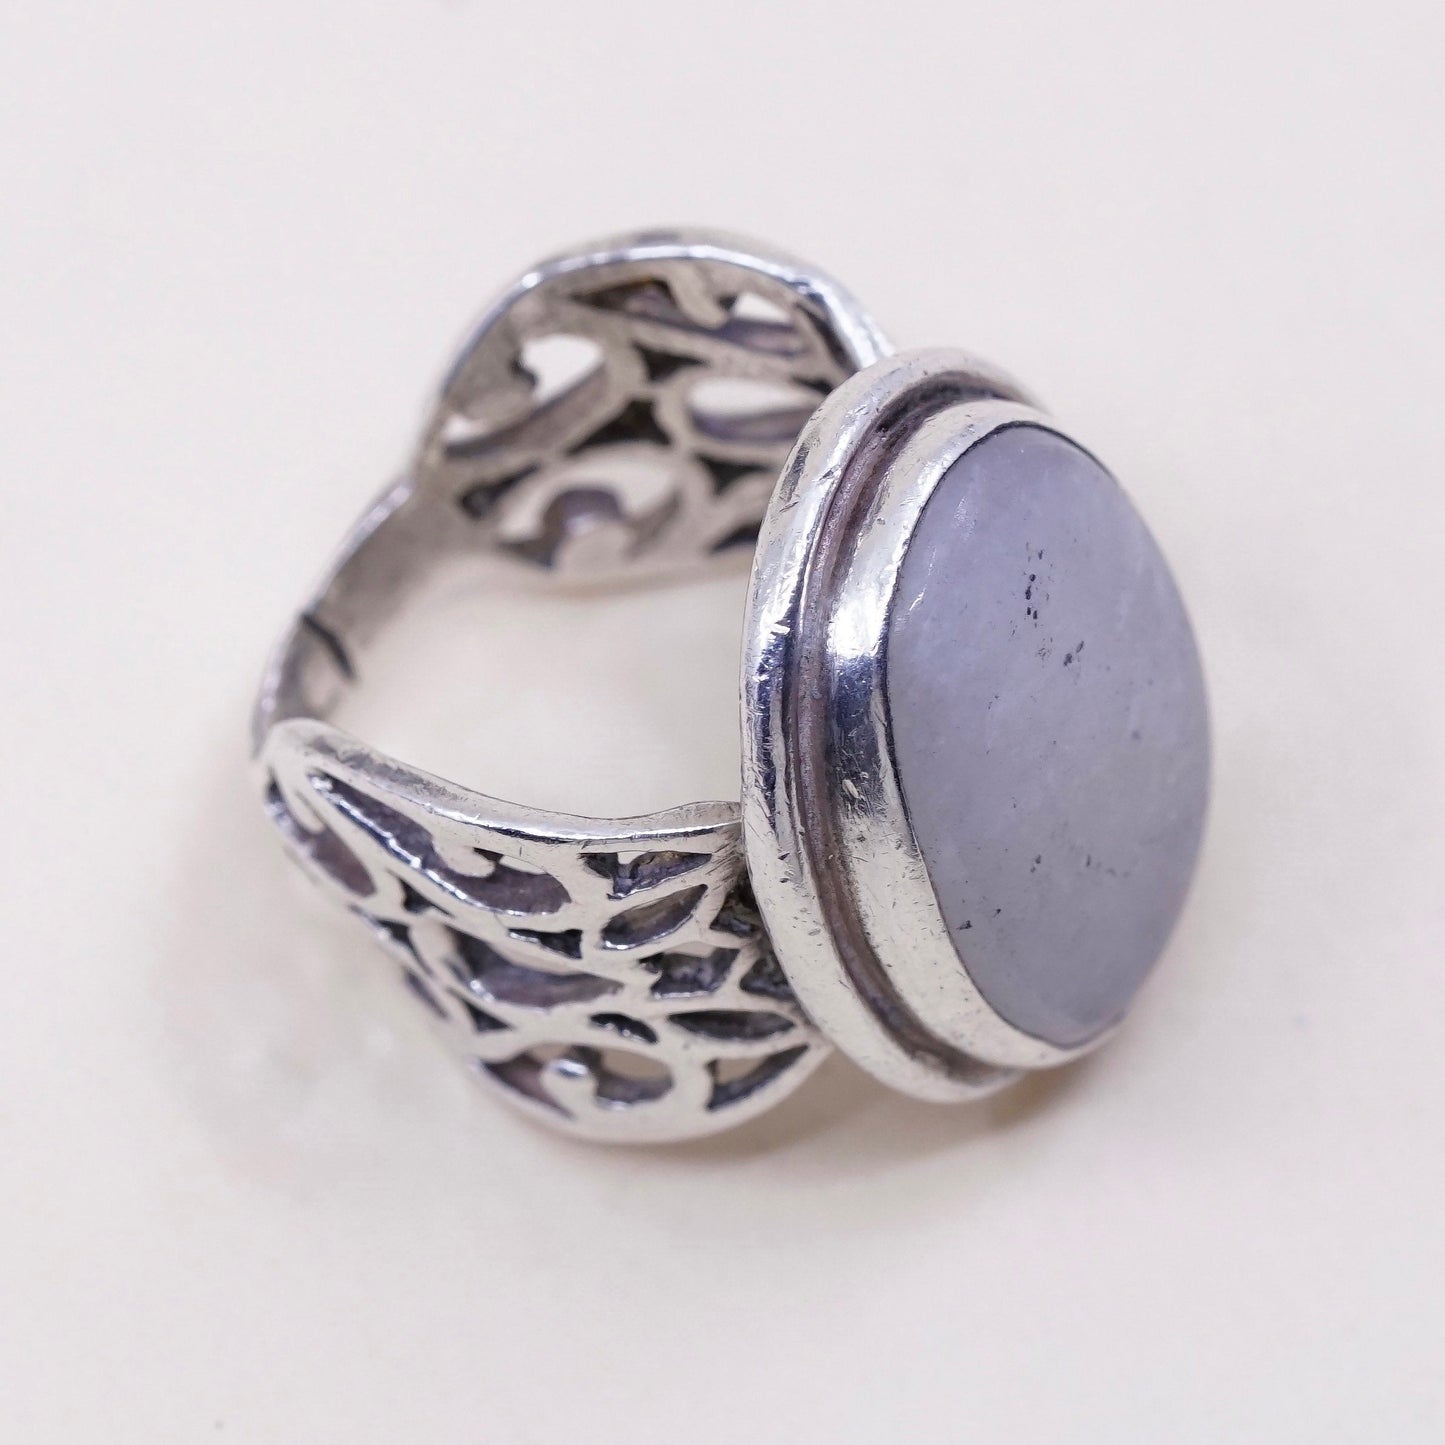 Size 6, vintage sterling 925 silver handmade filigree ring with moonstone